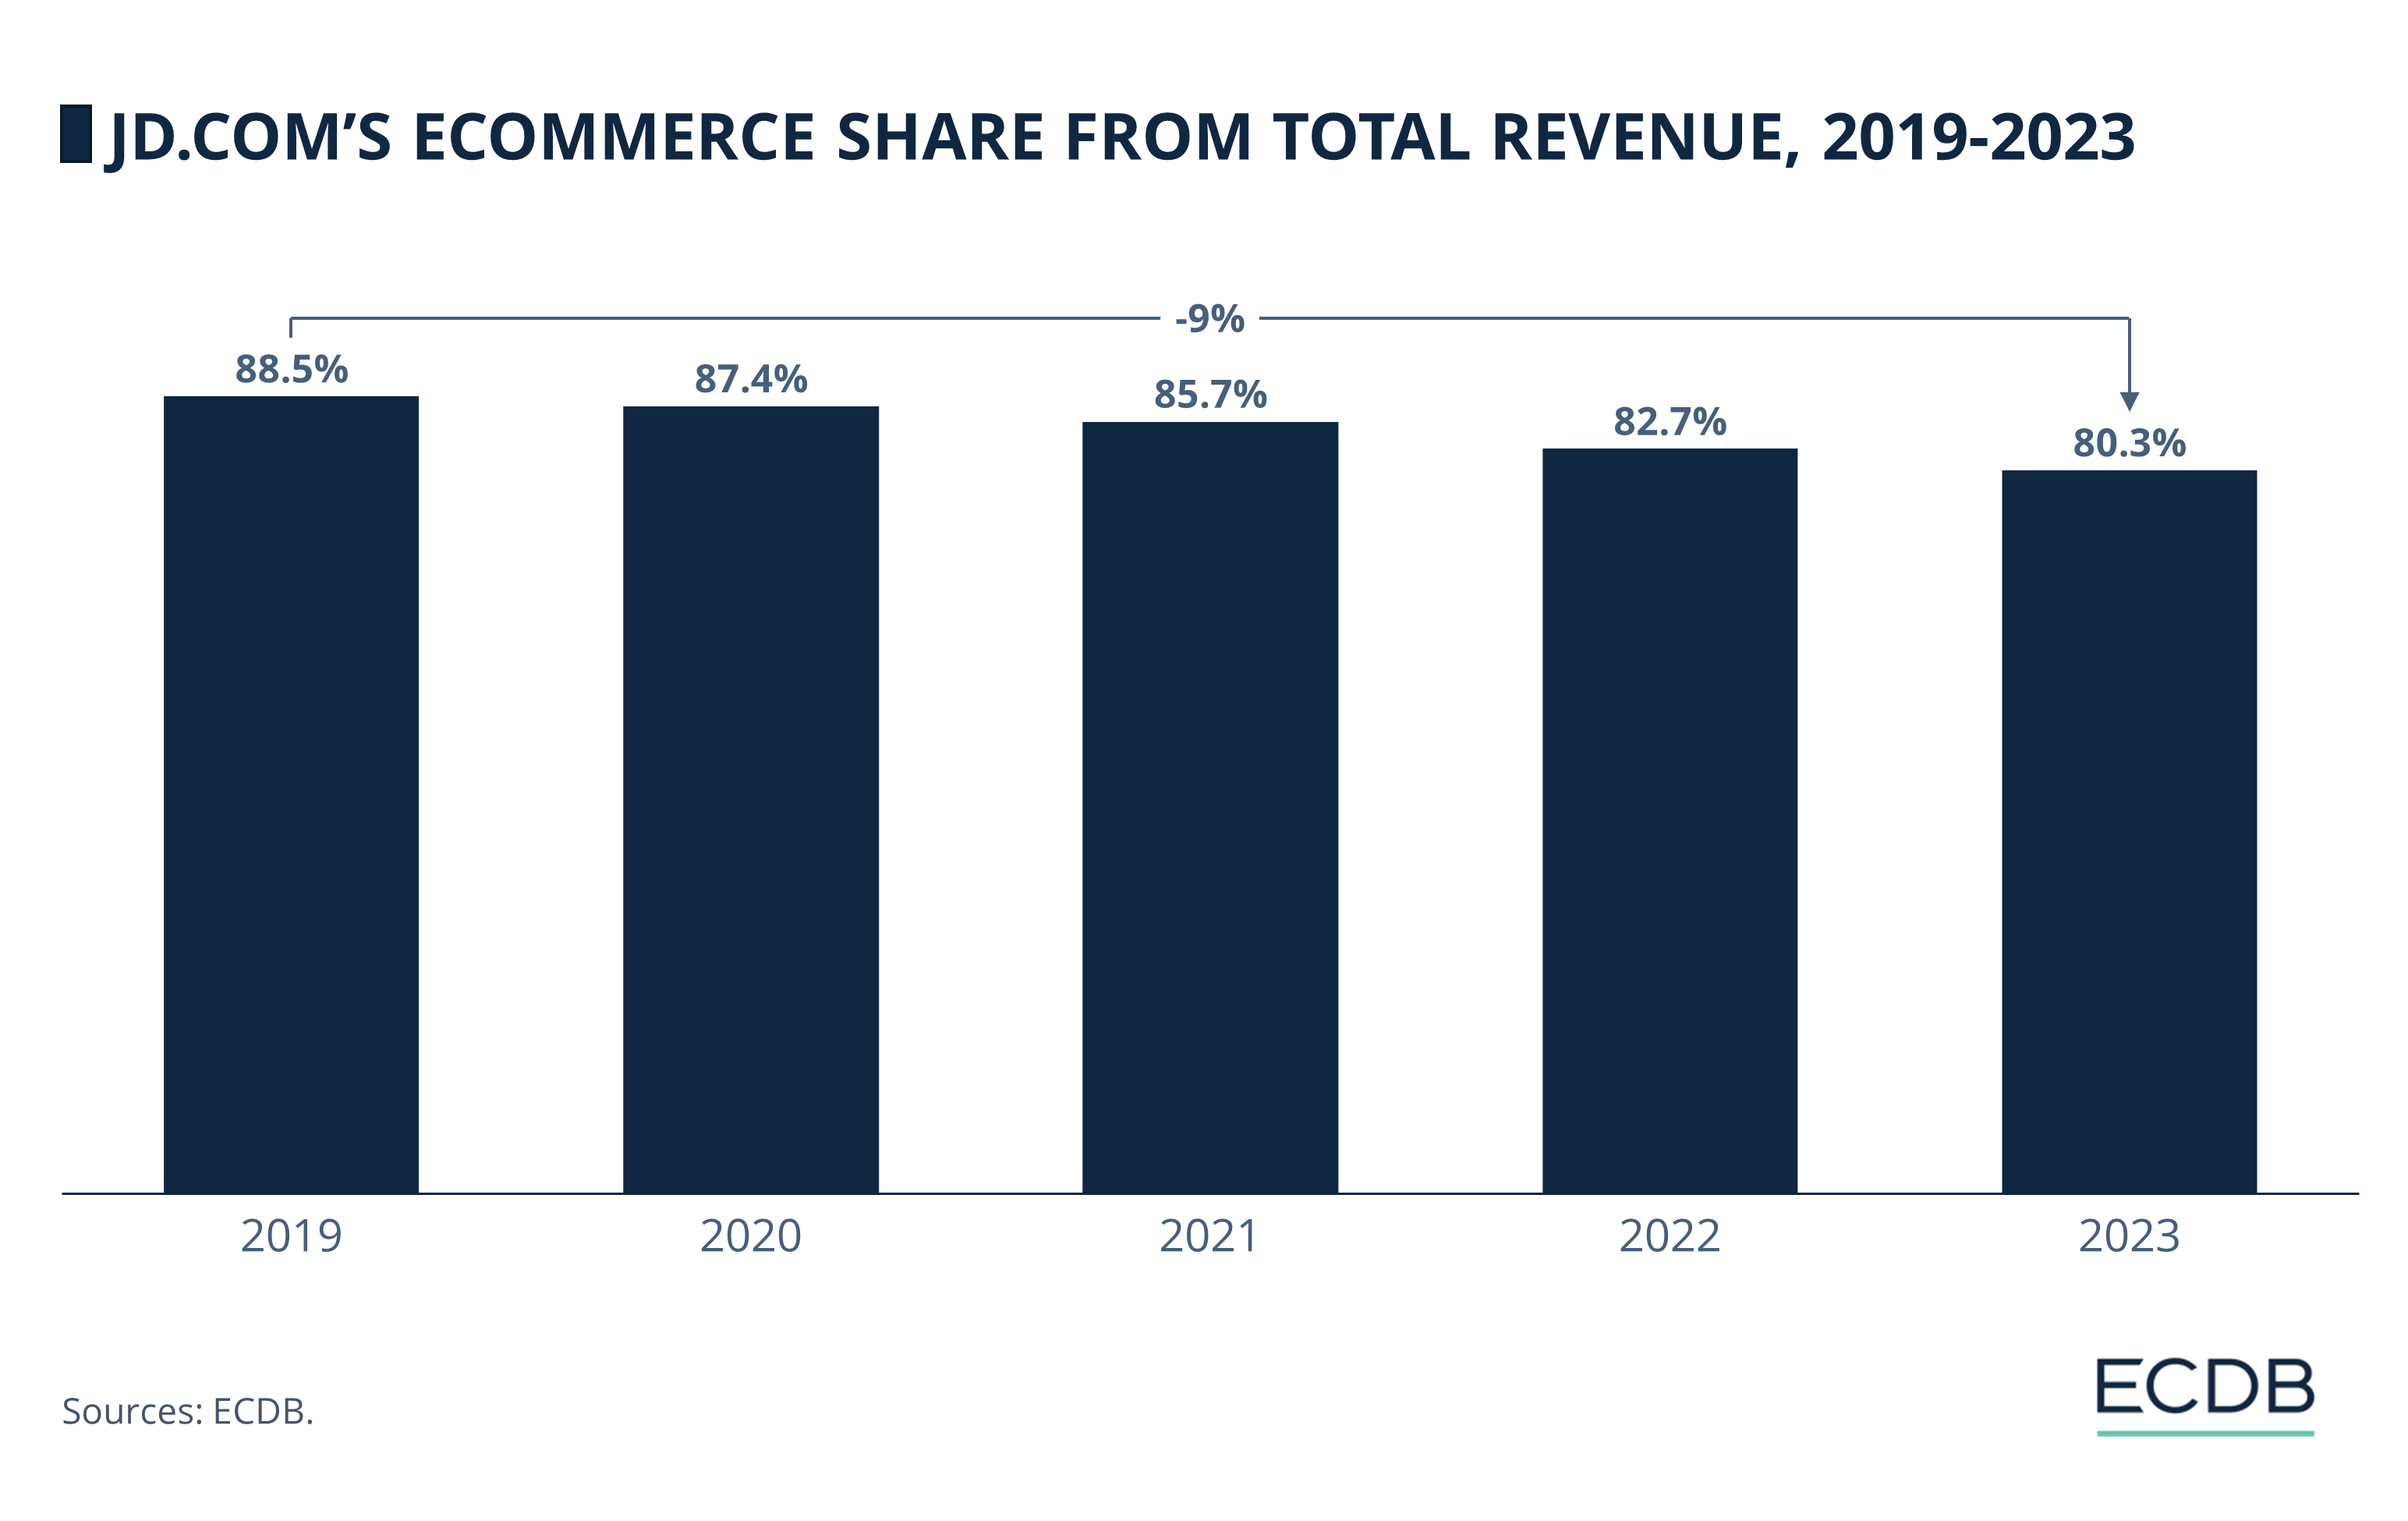 Jd.com's eCommerce Share from Total Revenue, 2019-2023